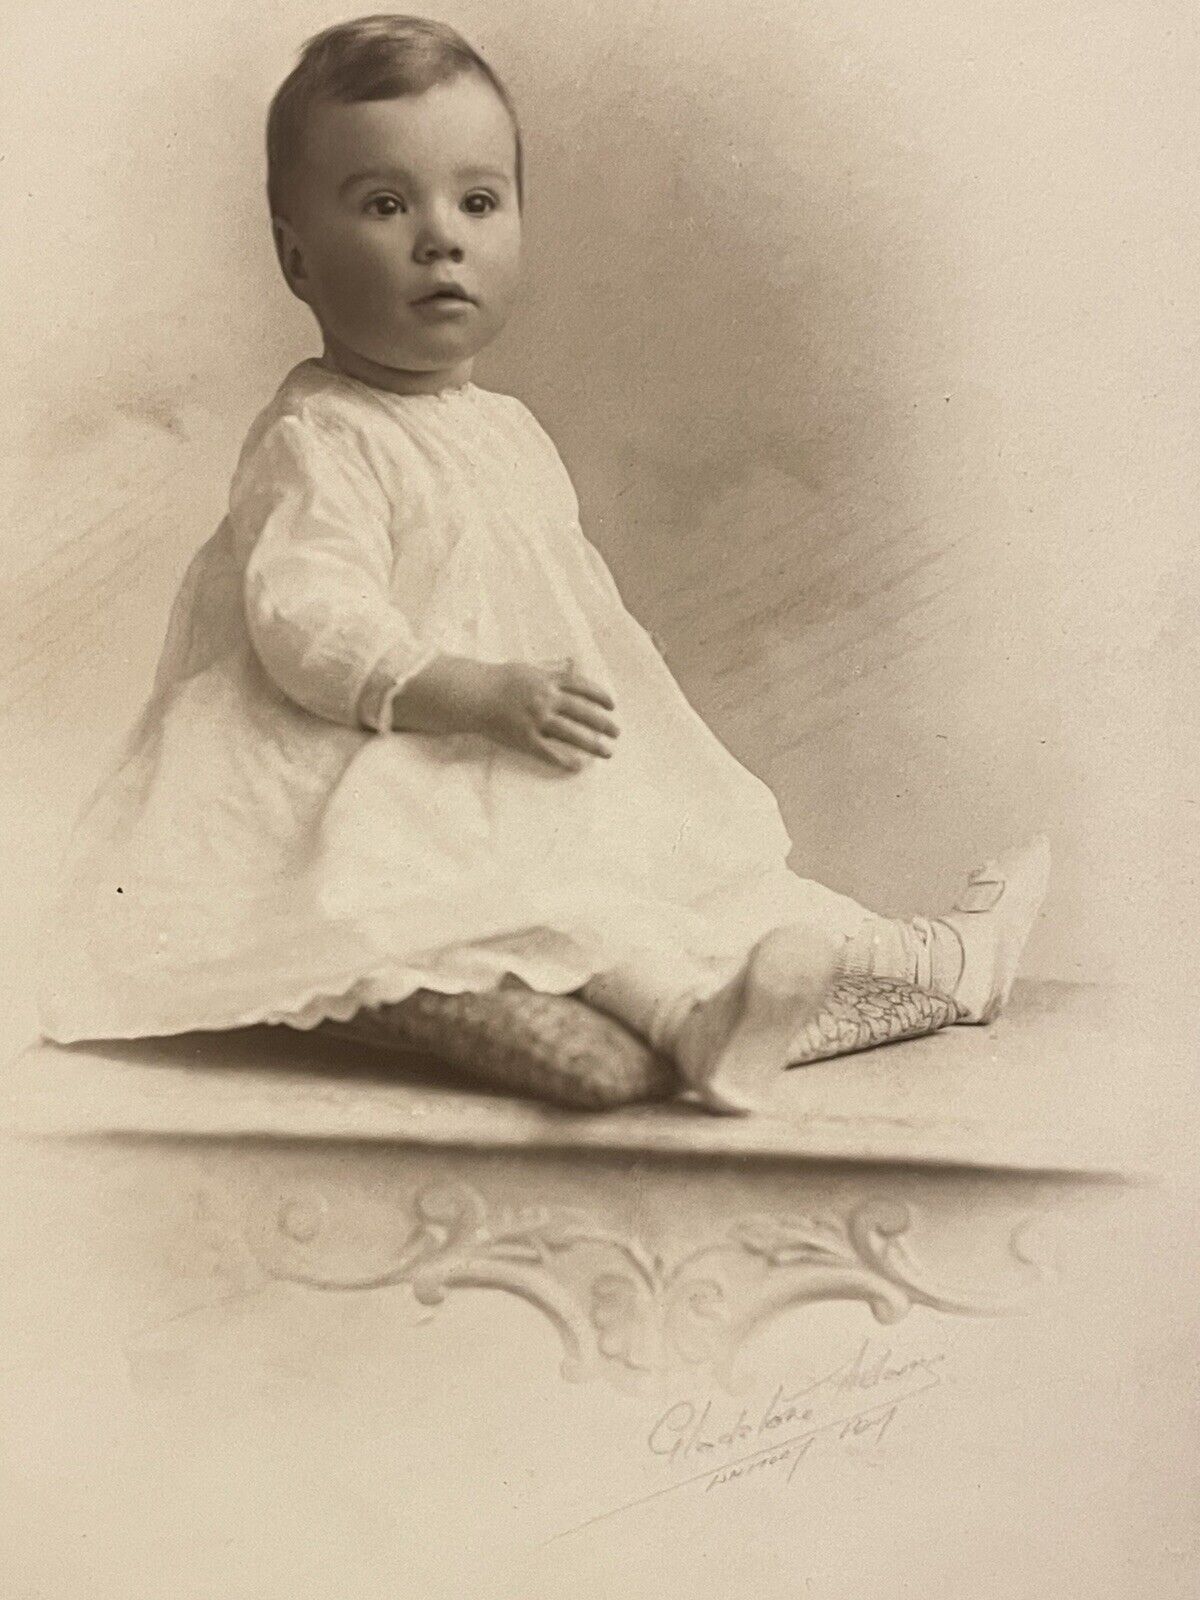 House Clearance - cdv photograph of baby by Gladstone Adams Whitley Bay